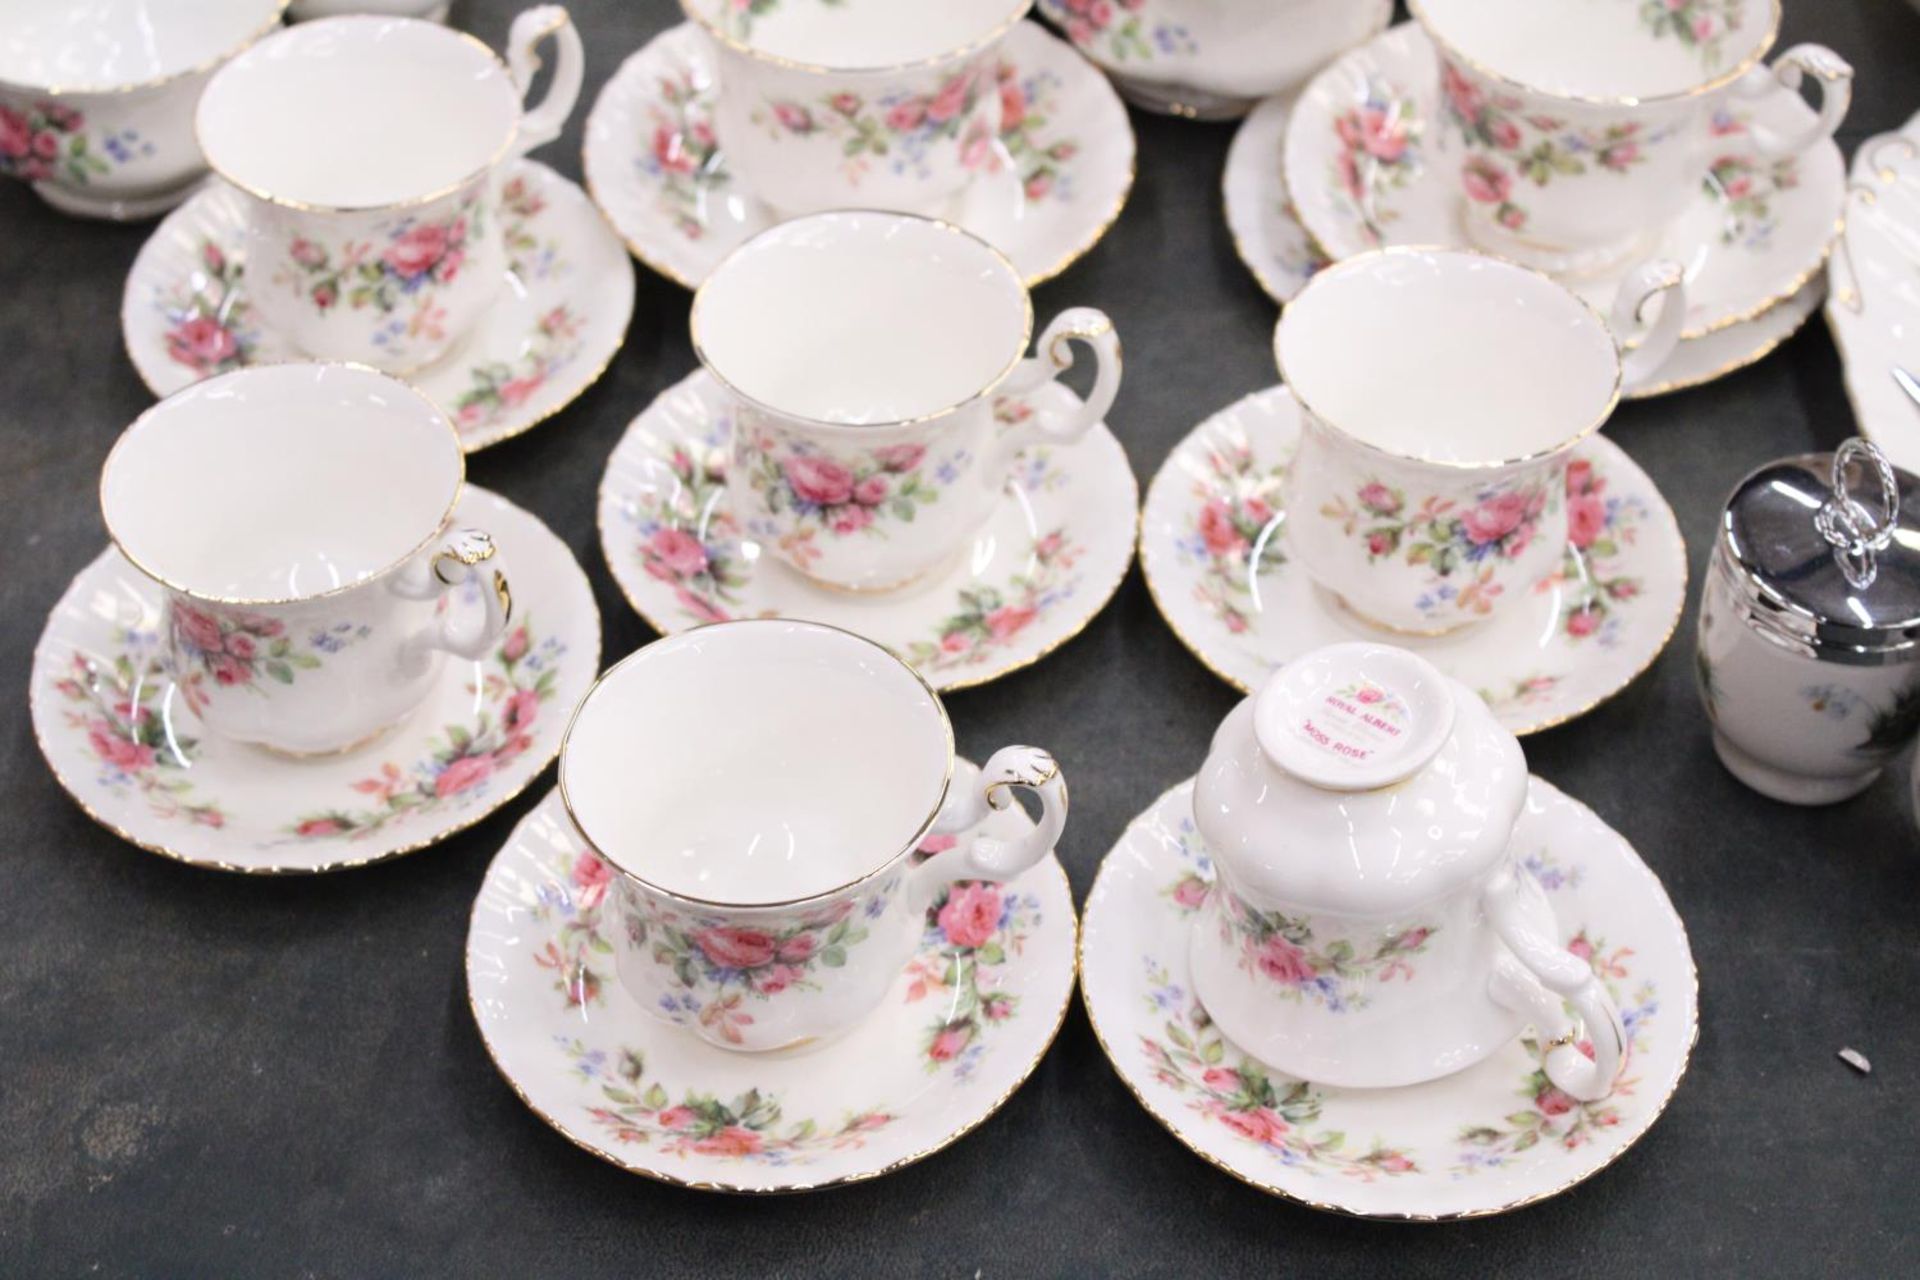 A ROYAL DOULTON 'MOSS ROSE' TEASET TO INCLUDE A TEAPOT AND COFFEE POT, PLATES, CREAM JUGS, A CAKE - Image 2 of 7